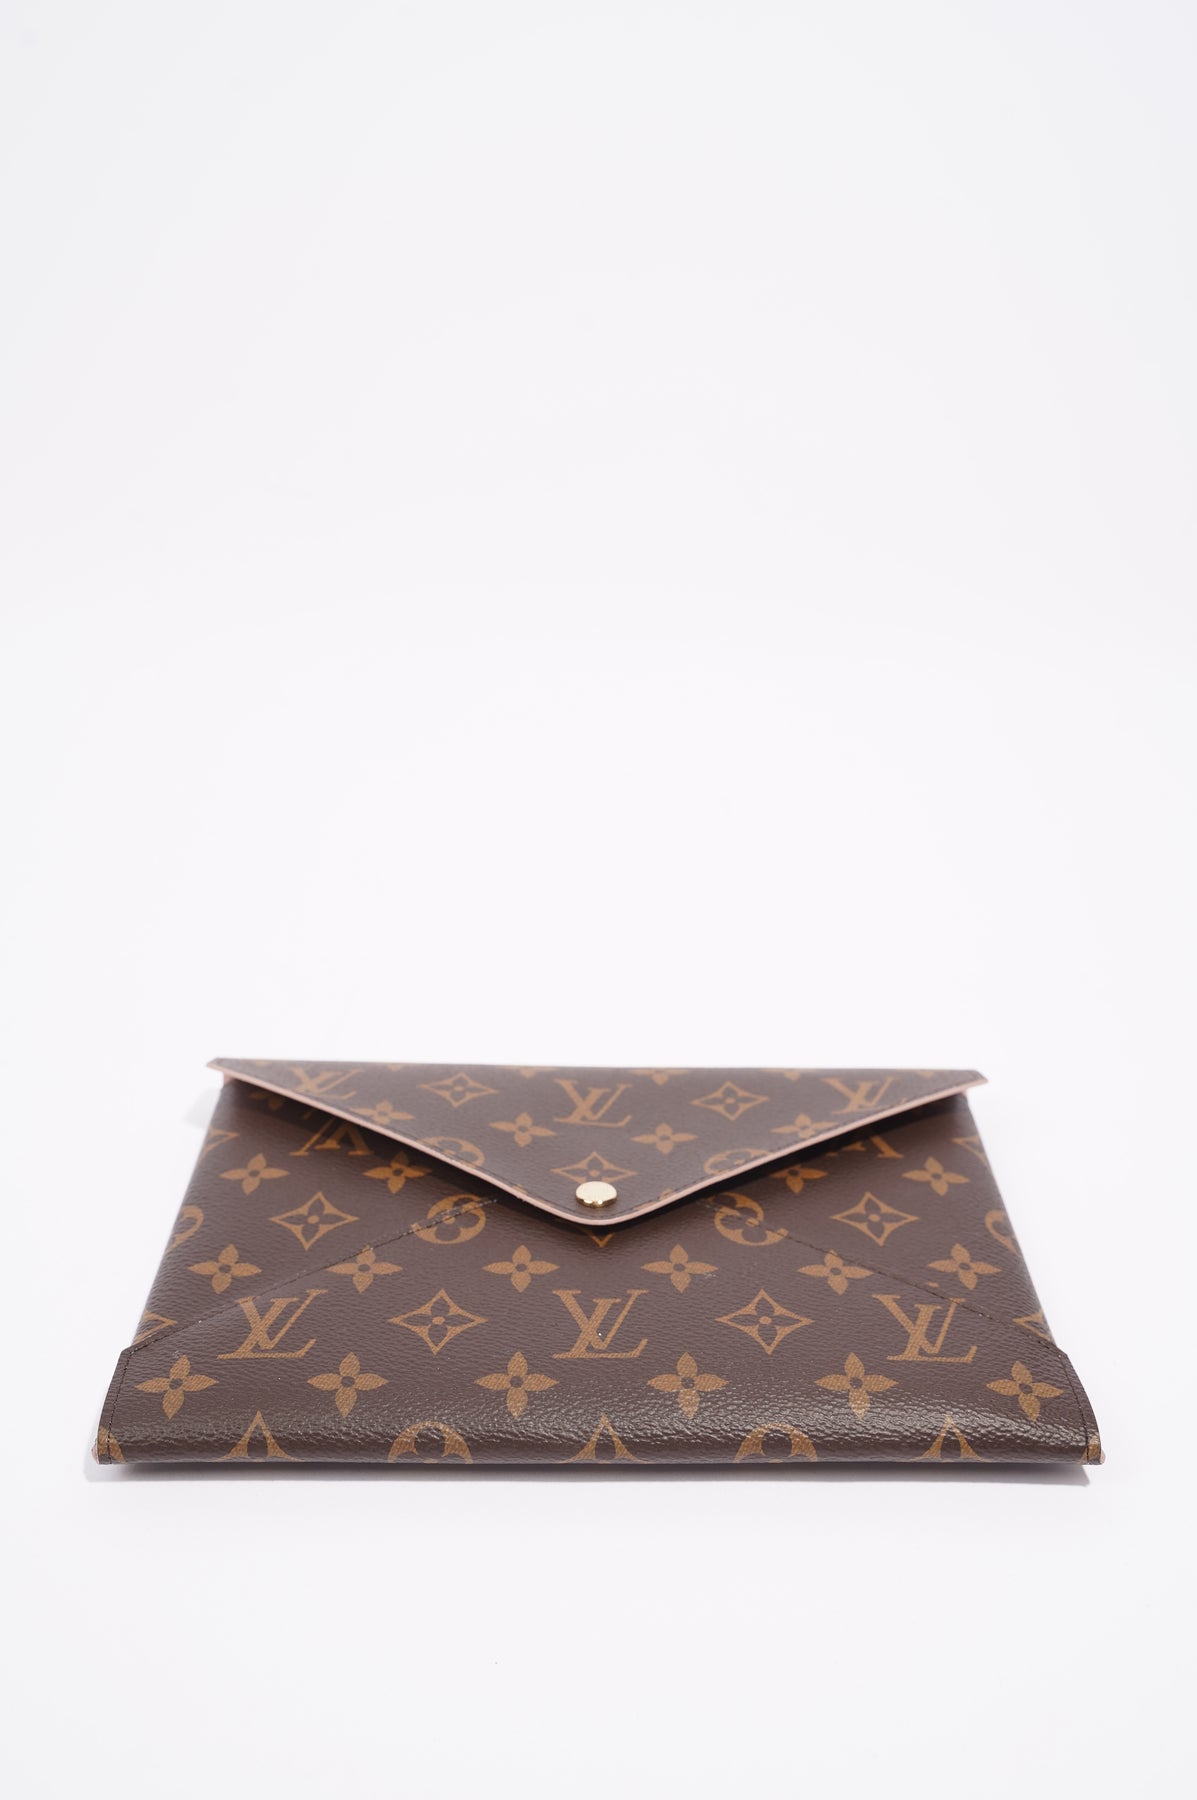 NEW Louis Vuitton Large Kirigami Pouch in Monogram